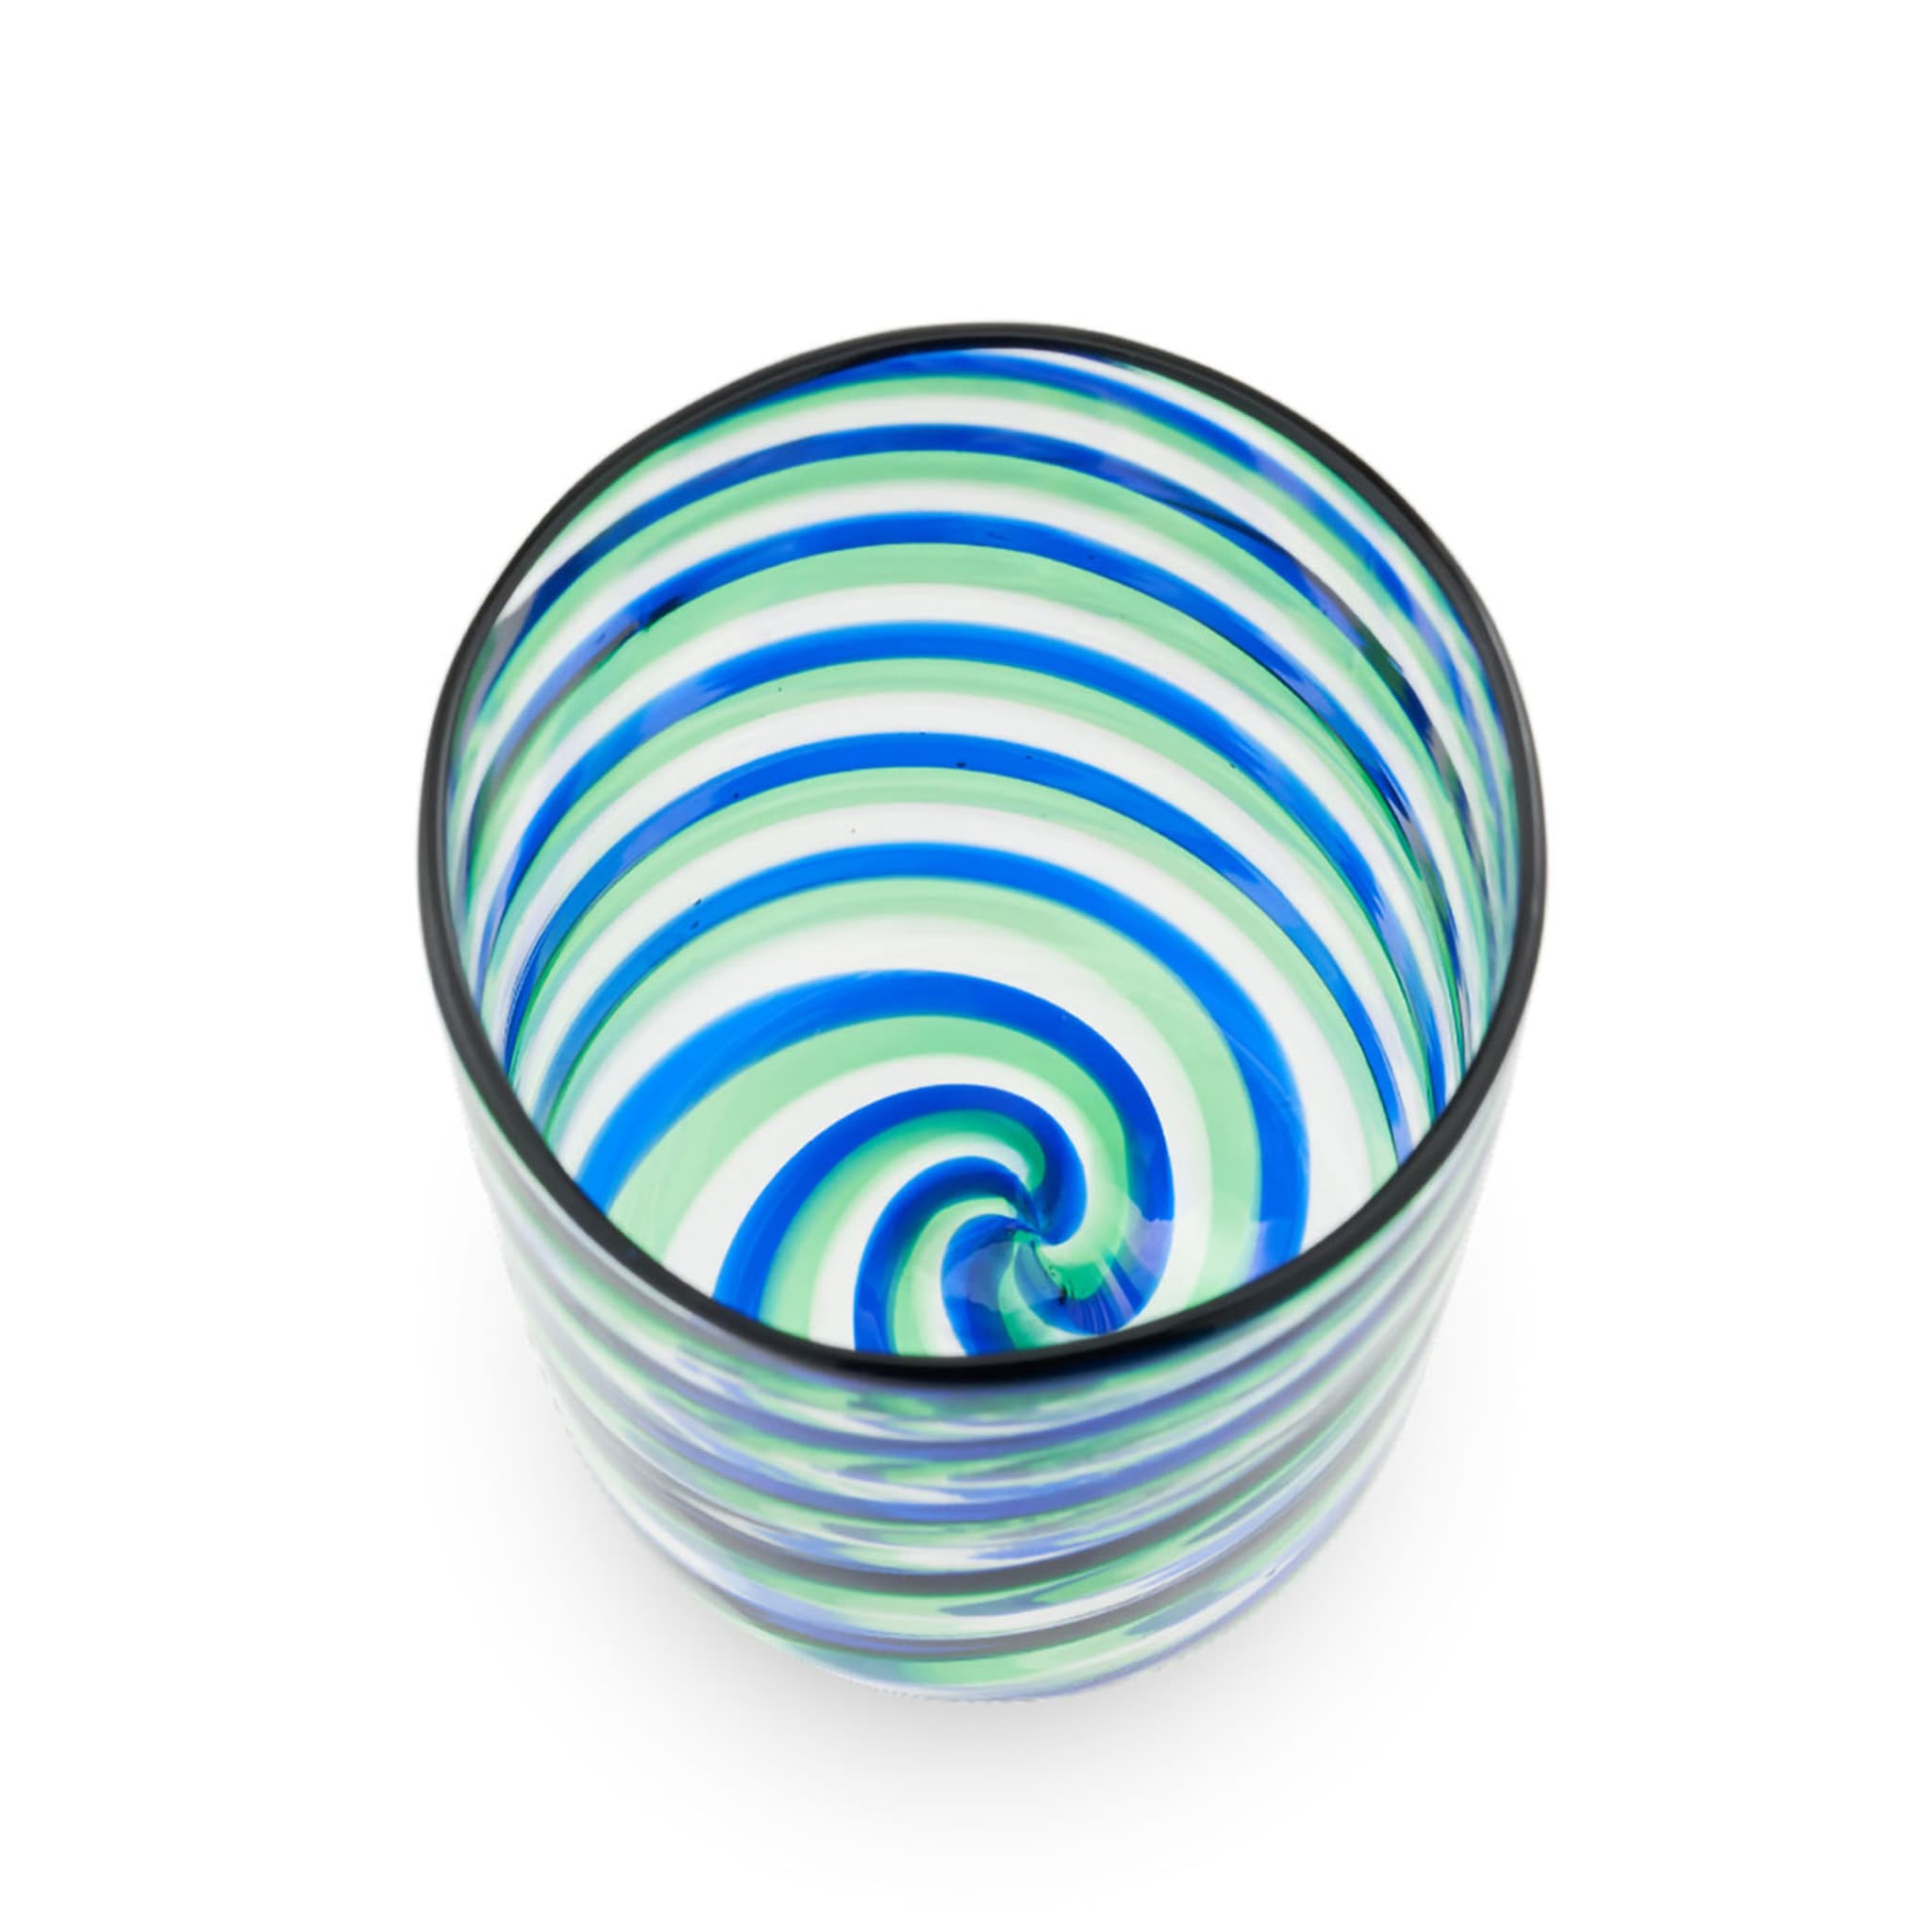 Rainbow Swirl Set of 2 Mouth-Blown Blue & Green Water Tumblers  - Alternative view 1